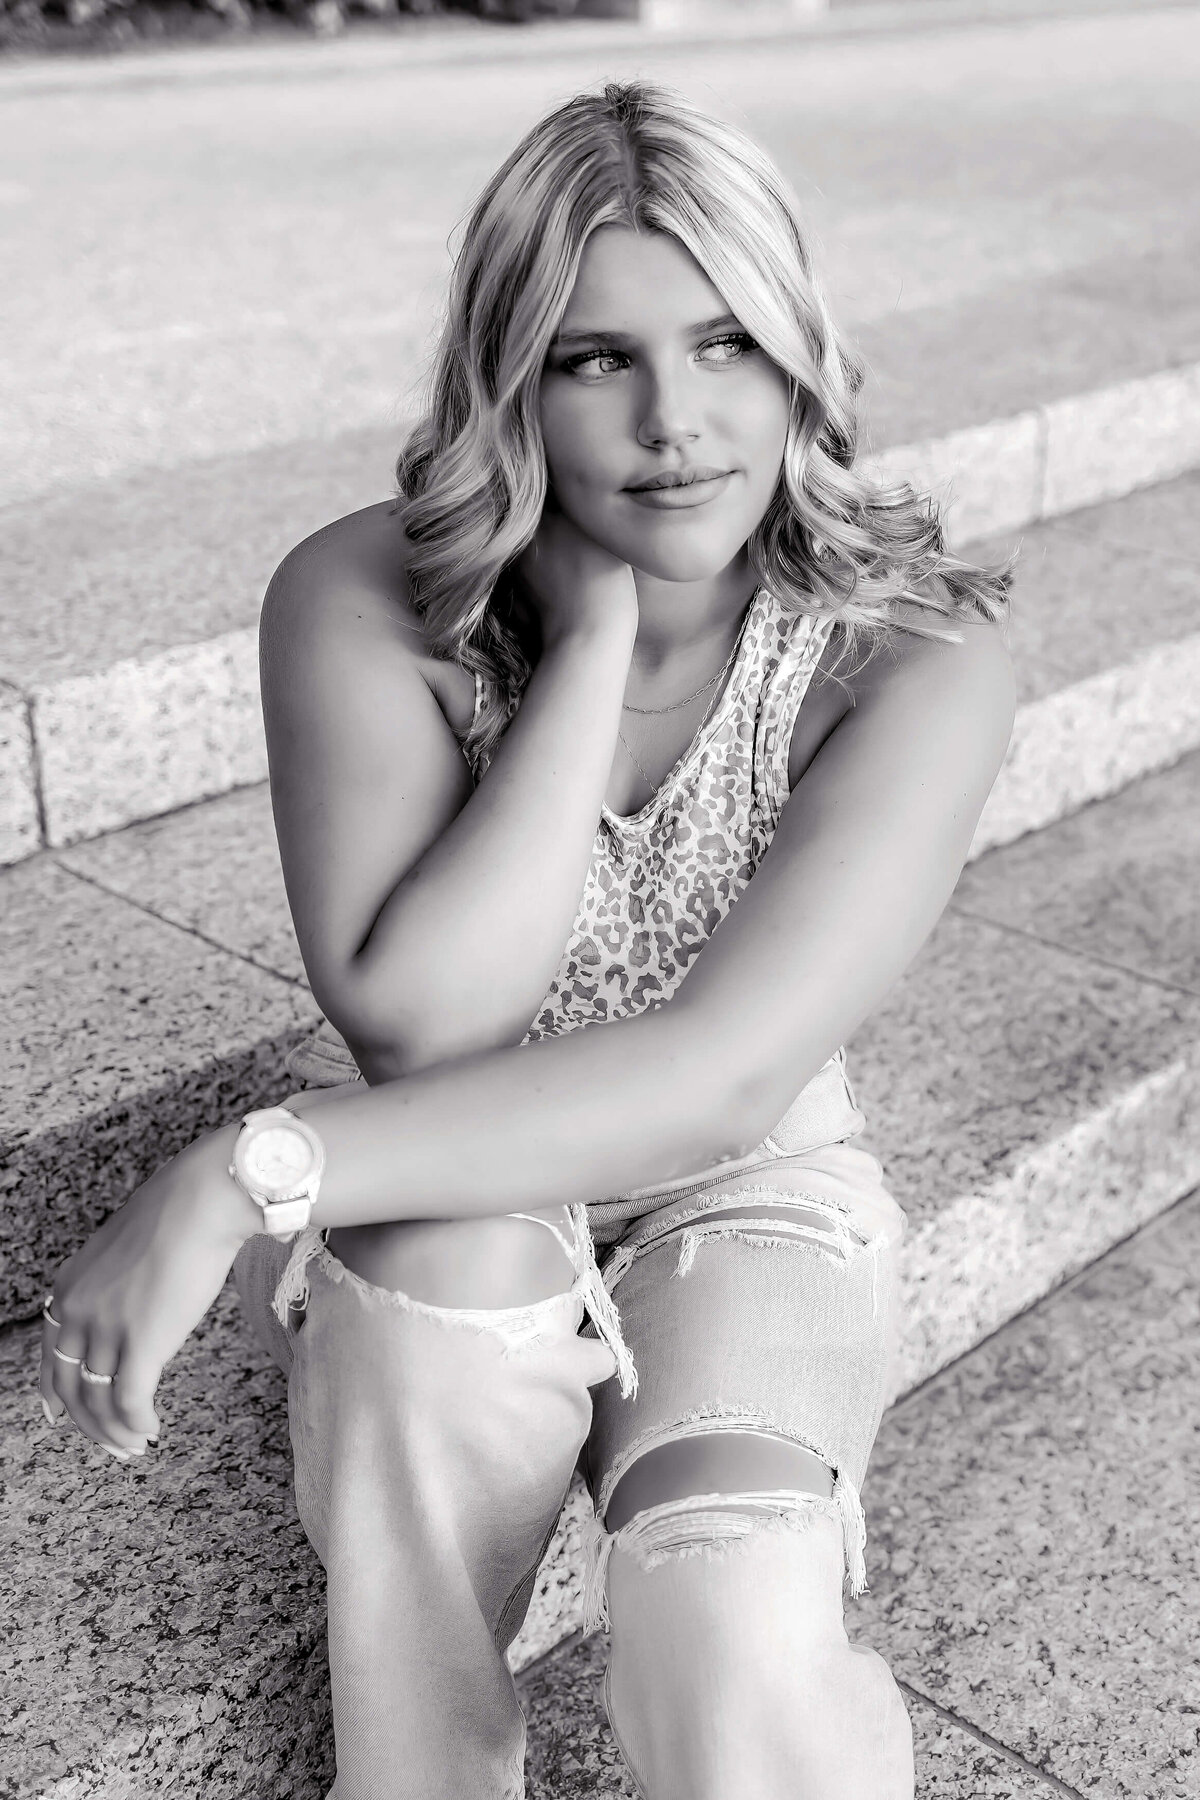 a beautiful blonde haired high school senior girl sitting on concrete steps outdoors in black and white